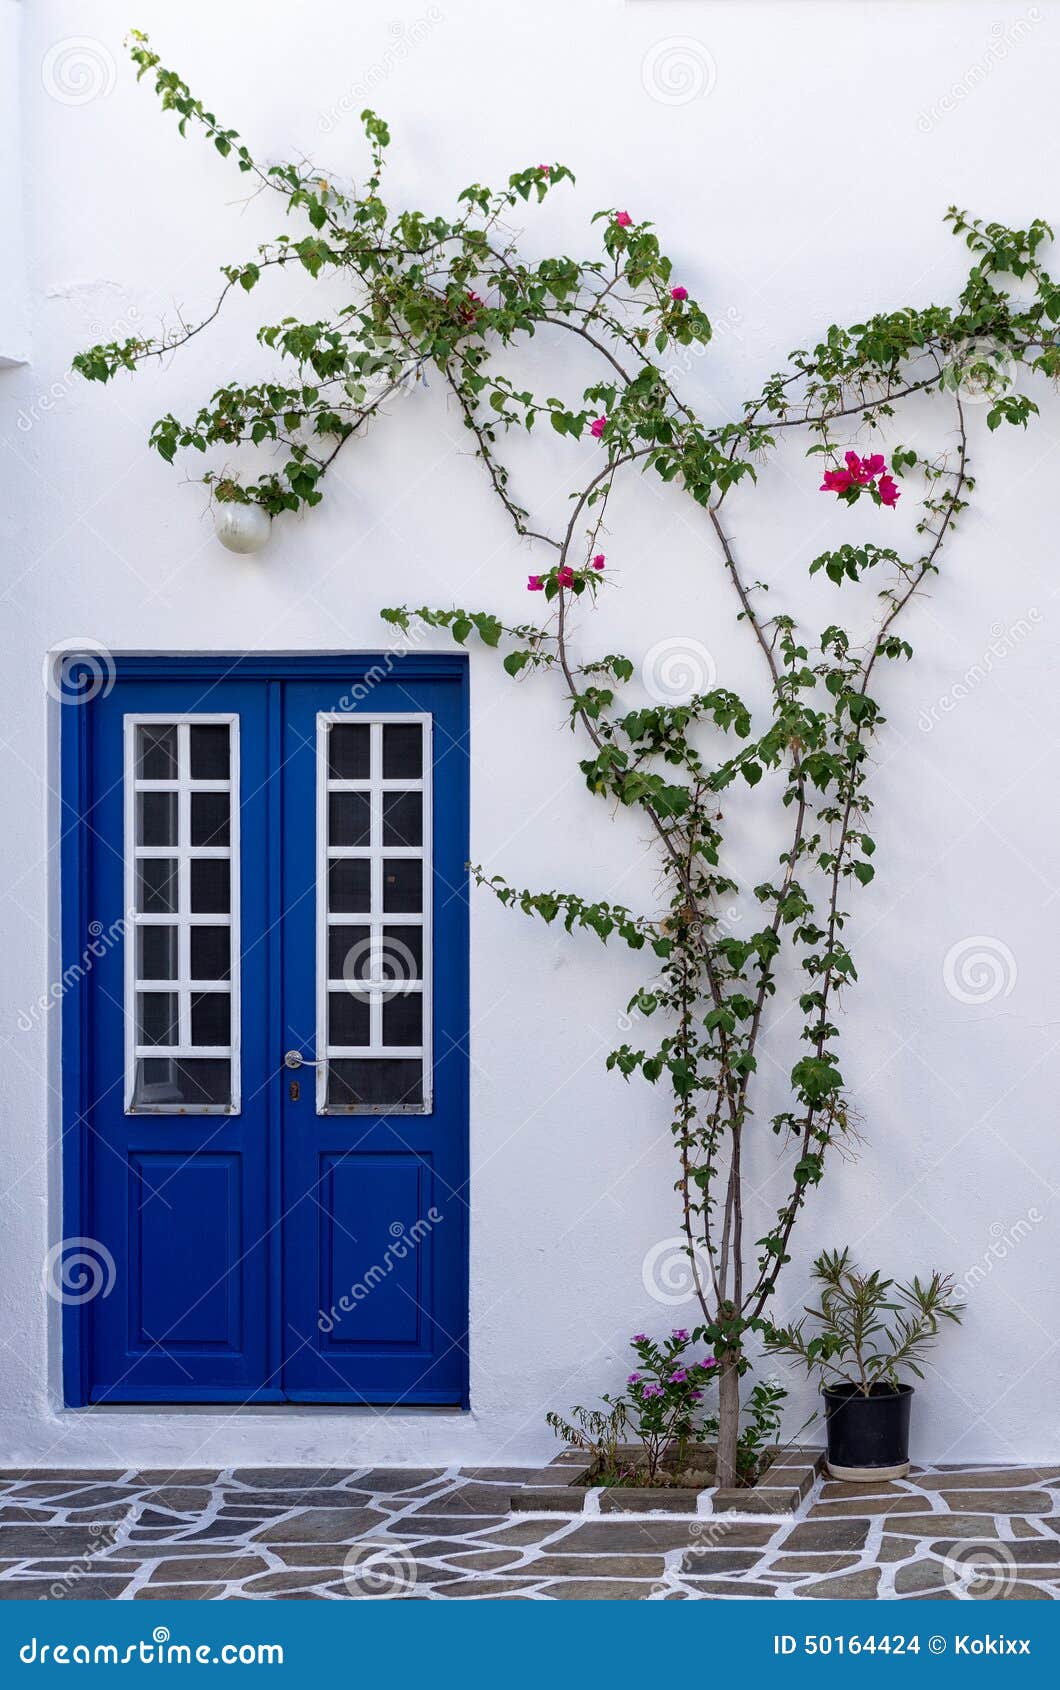 Architectural detail of a house in Paros island, Cyclades, Greece